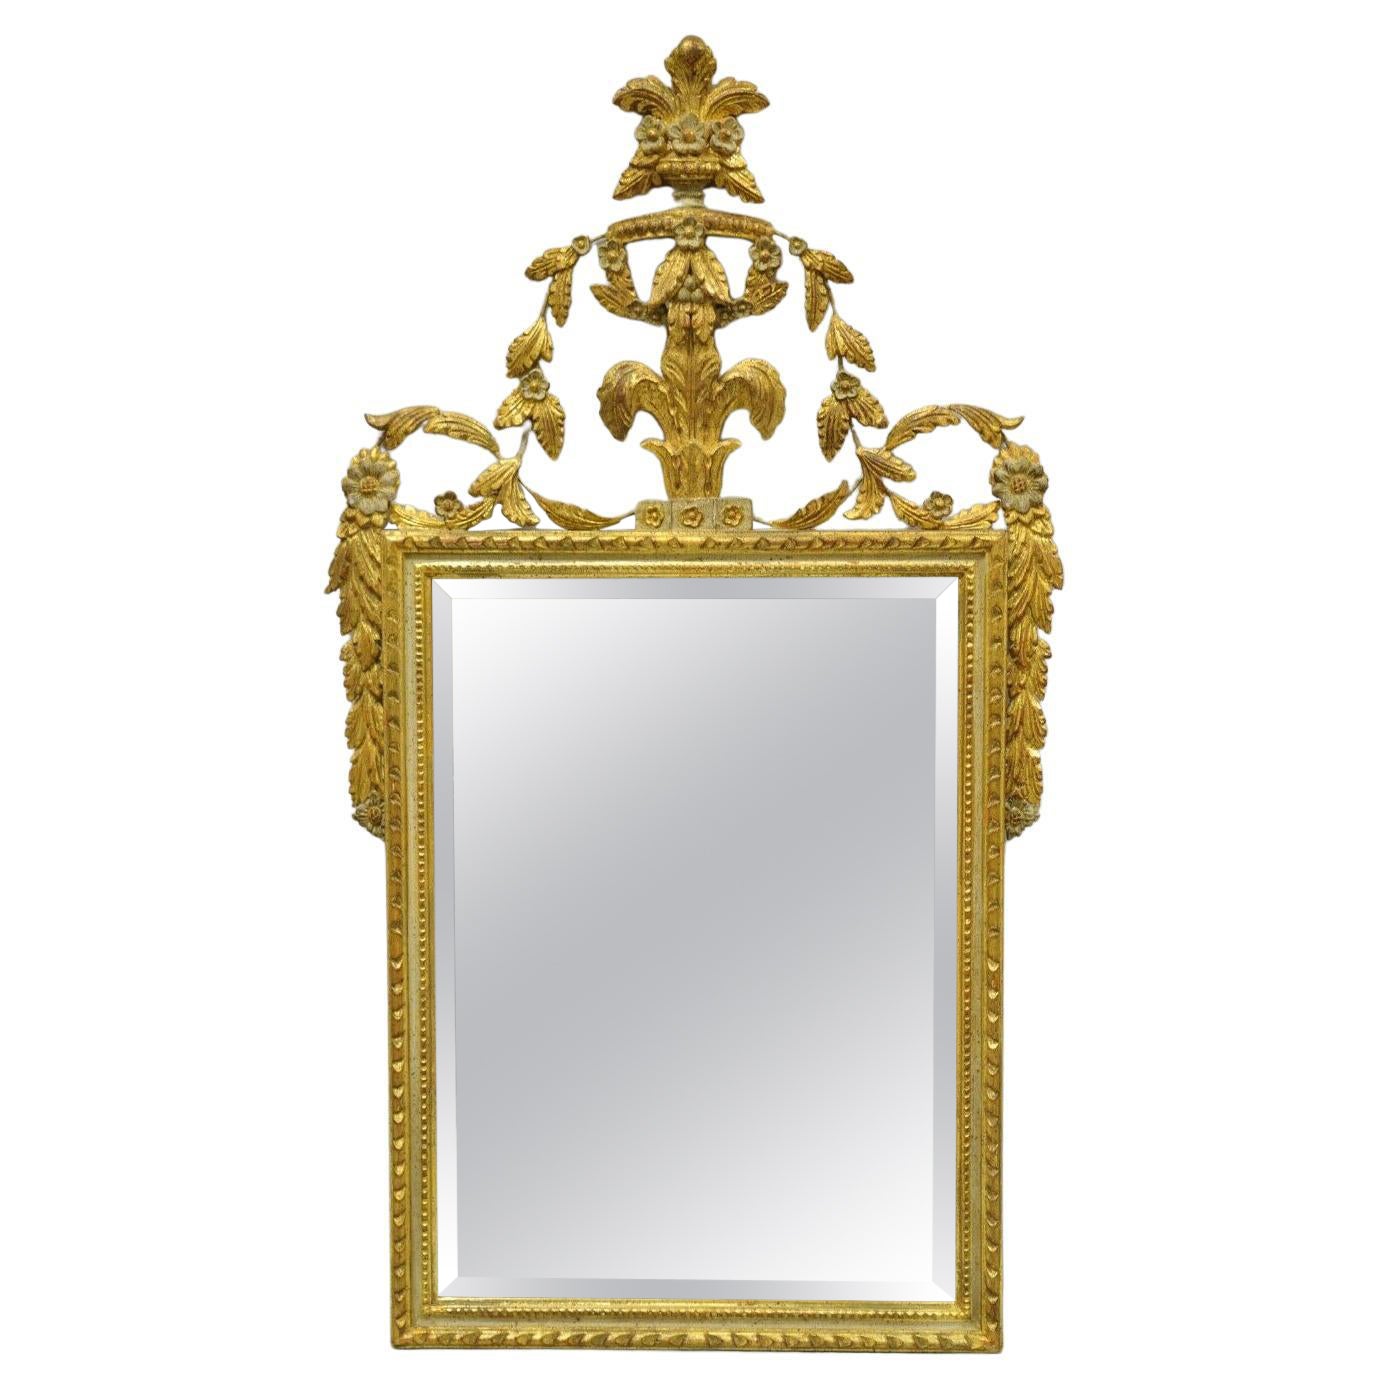 Vintage Italian Gold Giltwood Carved Wood Leafy Scrollwork Console Wall Mirror For Sale